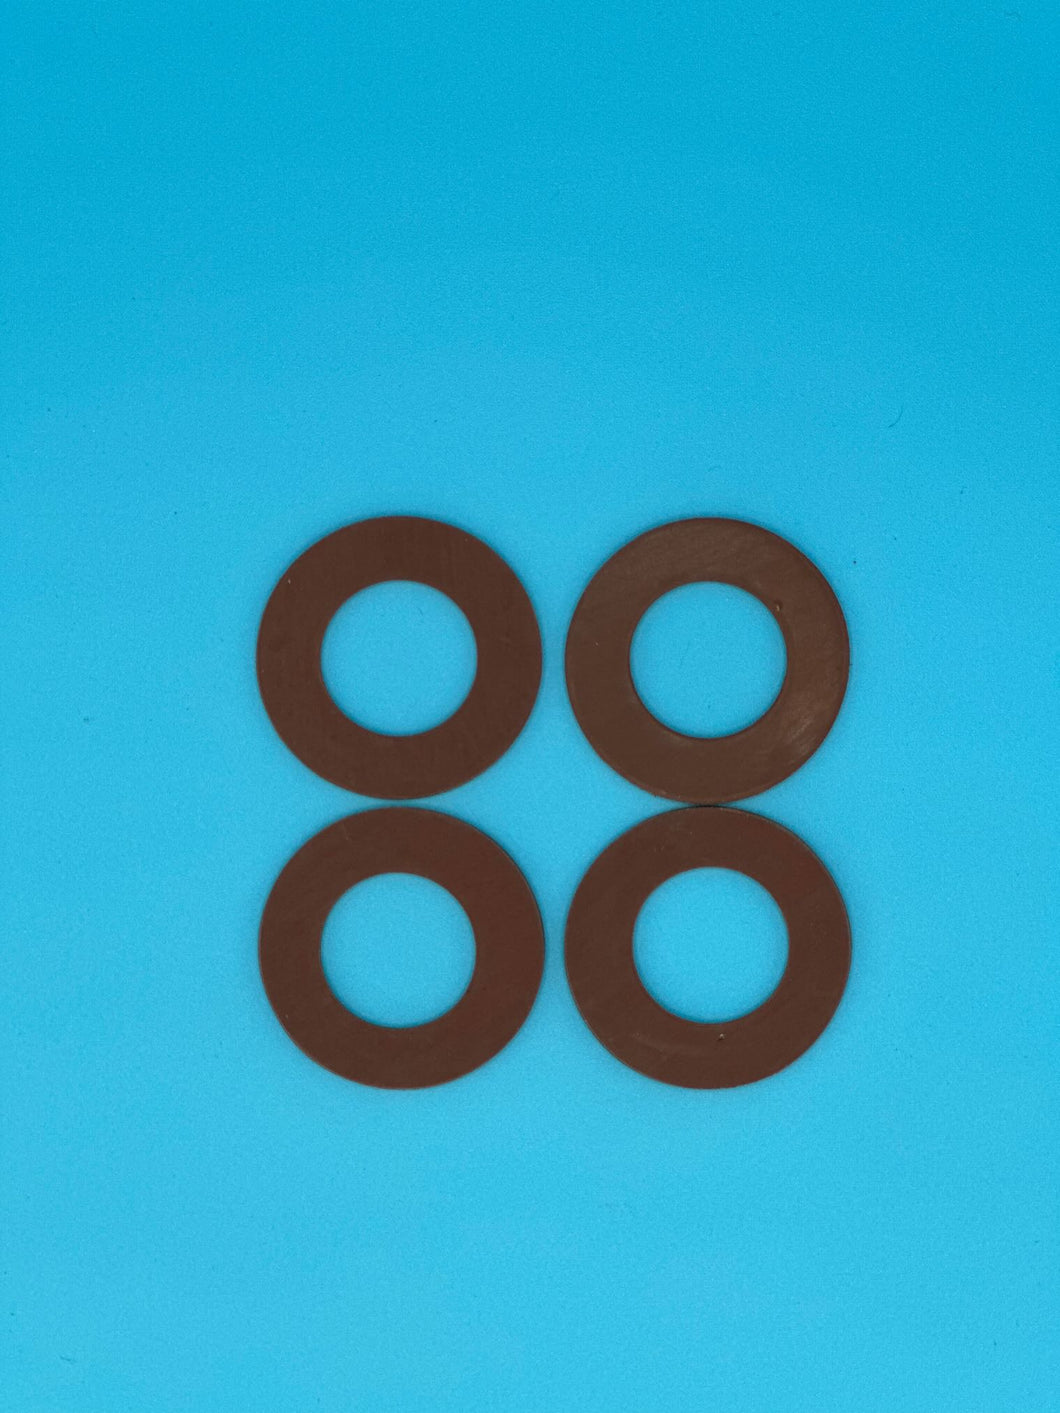 1 inch gasket - set of 4 - FREE US Shipping!